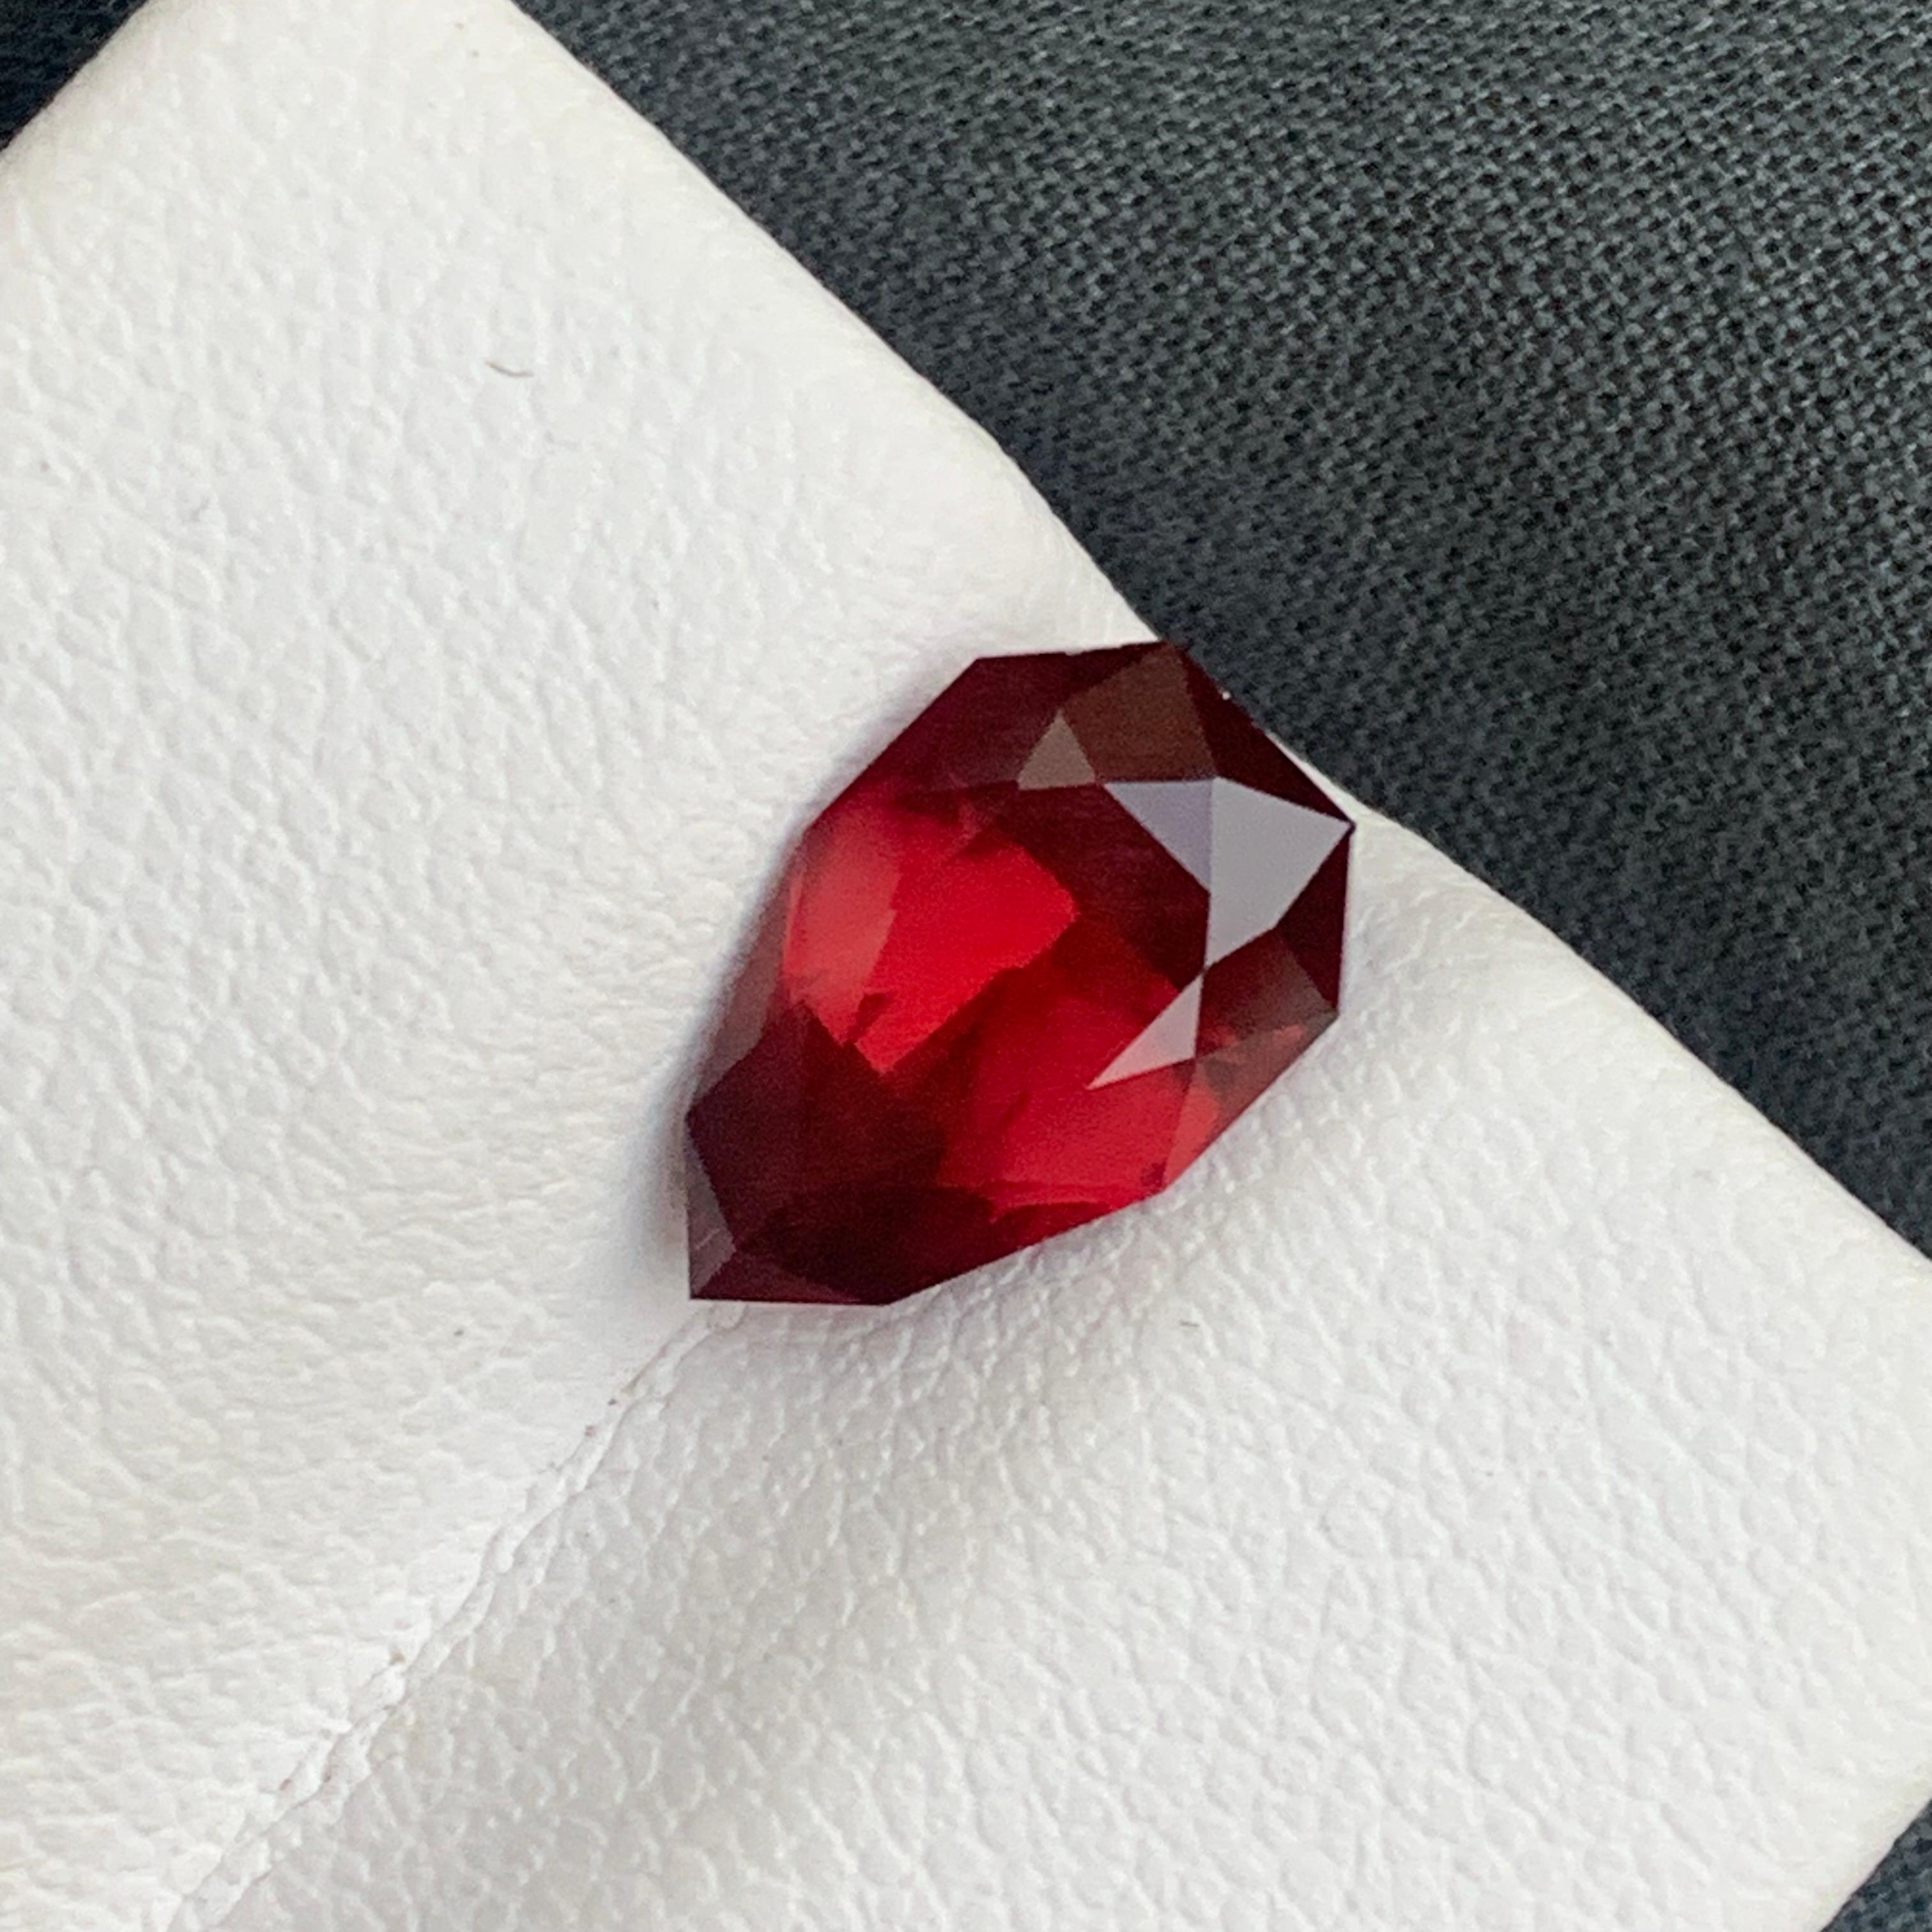 Loose Rhodolite Garnet
Weight : 2.55 Carats
Dimensions : 10.8x6.7x4.5 Mm
Origin : Tanzania Africa
Clarity : AAA 
Shape: Tear / Pear
Cut: Fancy
Certificate: On Demand
Treatment: Non
Color: Red
Rhodolite is a mixture of pyrope and almandite garnets.